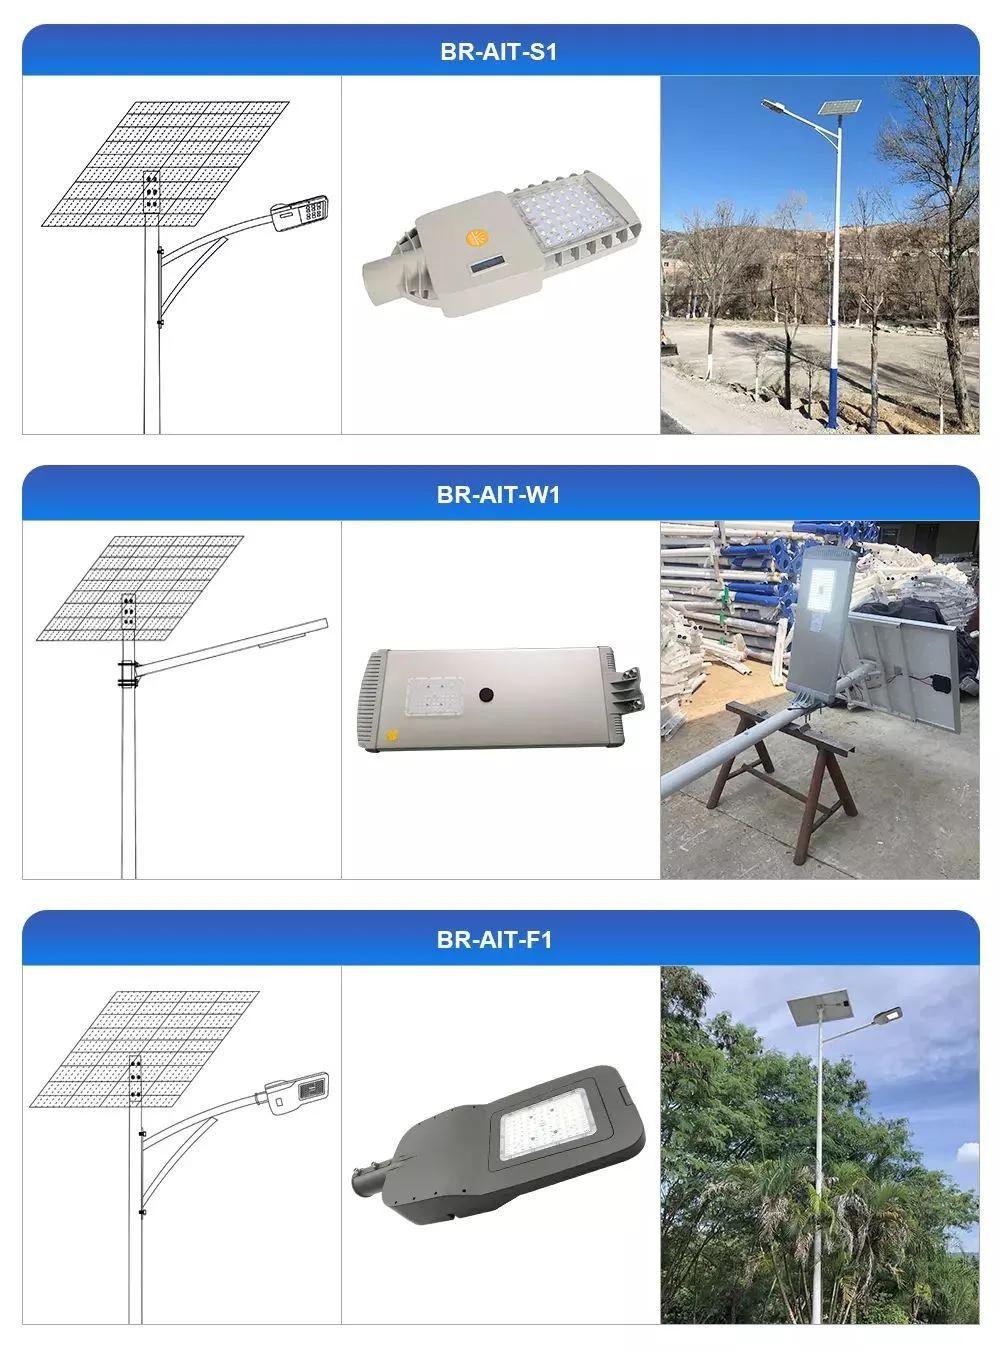 Br Solar Professional China Manufacturer of 30W All in Two Solar Street Lights